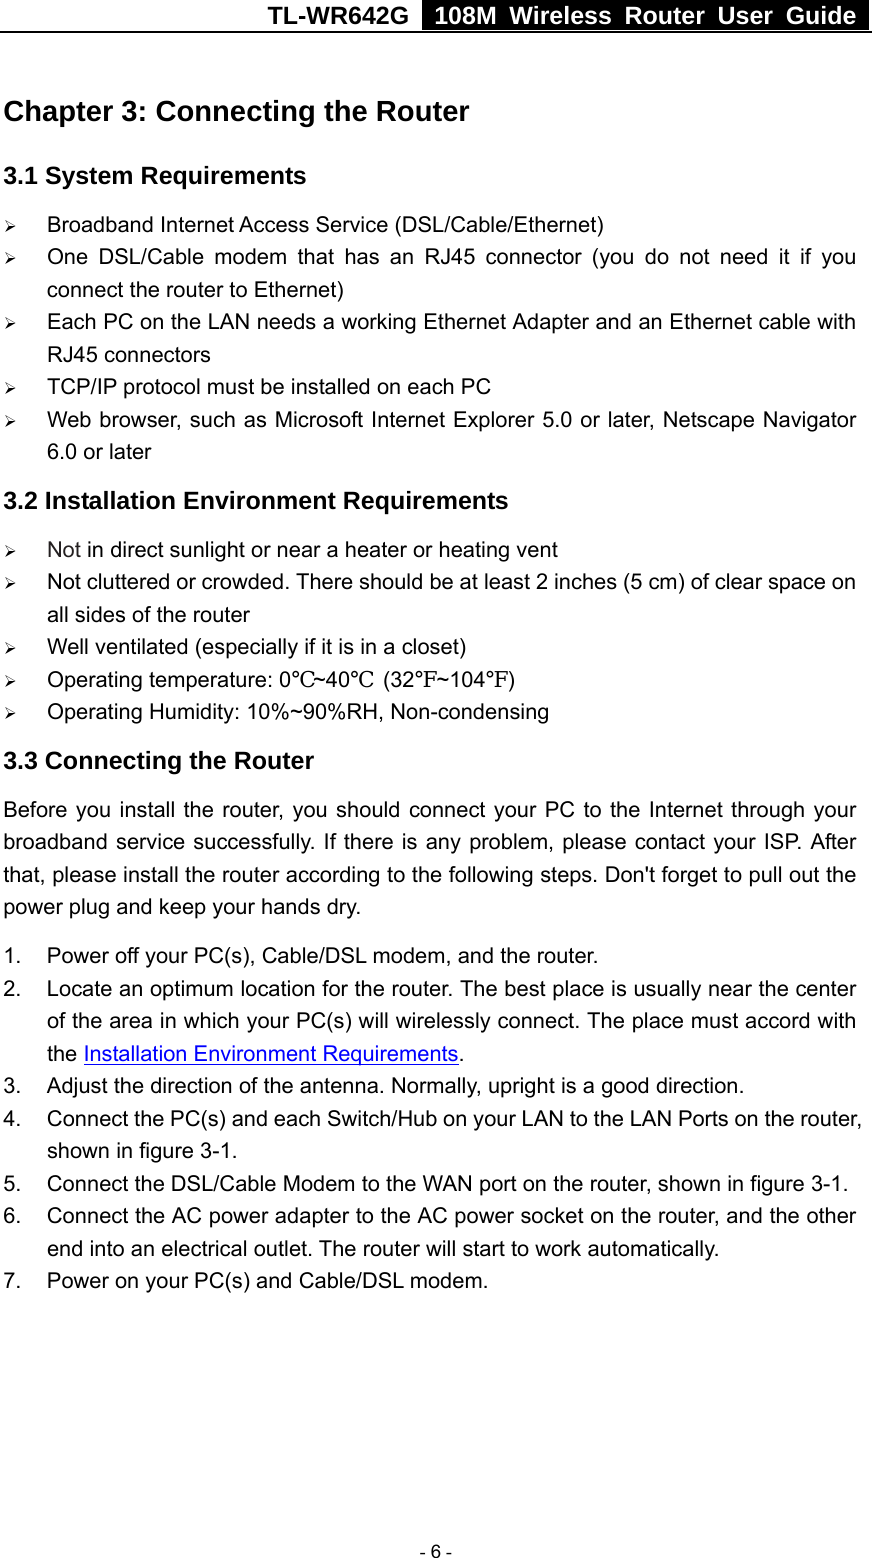 TL-WR642G   108M Wireless Router User Guide   - 6 - Chapter 3: Connecting the Router 3.1 System Requirements ¾ Broadband Internet Access Service (DSL/Cable/Ethernet) ¾ One DSL/Cable modem that has an RJ45 connector (you do not need it if you connect the router to Ethernet) ¾ Each PC on the LAN needs a working Ethernet Adapter and an Ethernet cable with RJ45 connectors ¾ TCP/IP protocol must be installed on each PC ¾ Web browser, such as Microsoft Internet Explorer 5.0 or later, Netscape Navigator 6.0 or later 3.2 Installation Environment Requirements ¾ Not in direct sunlight or near a heater or heating vent ¾ Not cluttered or crowded. There should be at least 2 inches (5 cm) of clear space on all sides of the router ¾ Well ventilated (especially if it is in a closet) ¾ Operating temperature: 0℃~40℃ (32℉~104℉) ¾ Operating Humidity: 10%~90%RH, Non-condensing 3.3 Connecting the Router Before you install the router, you should connect your PC to the Internet through your broadband service successfully. If there is any problem, please contact your ISP. After that, please install the router according to the following steps. Don&apos;t forget to pull out the power plug and keep your hands dry. 1.  Power off your PC(s), Cable/DSL modem, and the router. 2.  Locate an optimum location for the router. The best place is usually near the center of the area in which your PC(s) will wirelessly connect. The place must accord with the Installation Environment Requirements. 3.  Adjust the direction of the antenna. Normally, upright is a good direction. 4.  Connect the PC(s) and each Switch/Hub on your LAN to the LAN Ports on the router, shown in figure 3-1. 5. Connect the DSL/Cable Modem to the WAN port on the router, shown in figure 3-1. 6.  Connect the AC power adapter to the AC power socket on the router, and the other end into an electrical outlet. The router will start to work automatically. 7.  Power on your PC(s) and Cable/DSL modem. 